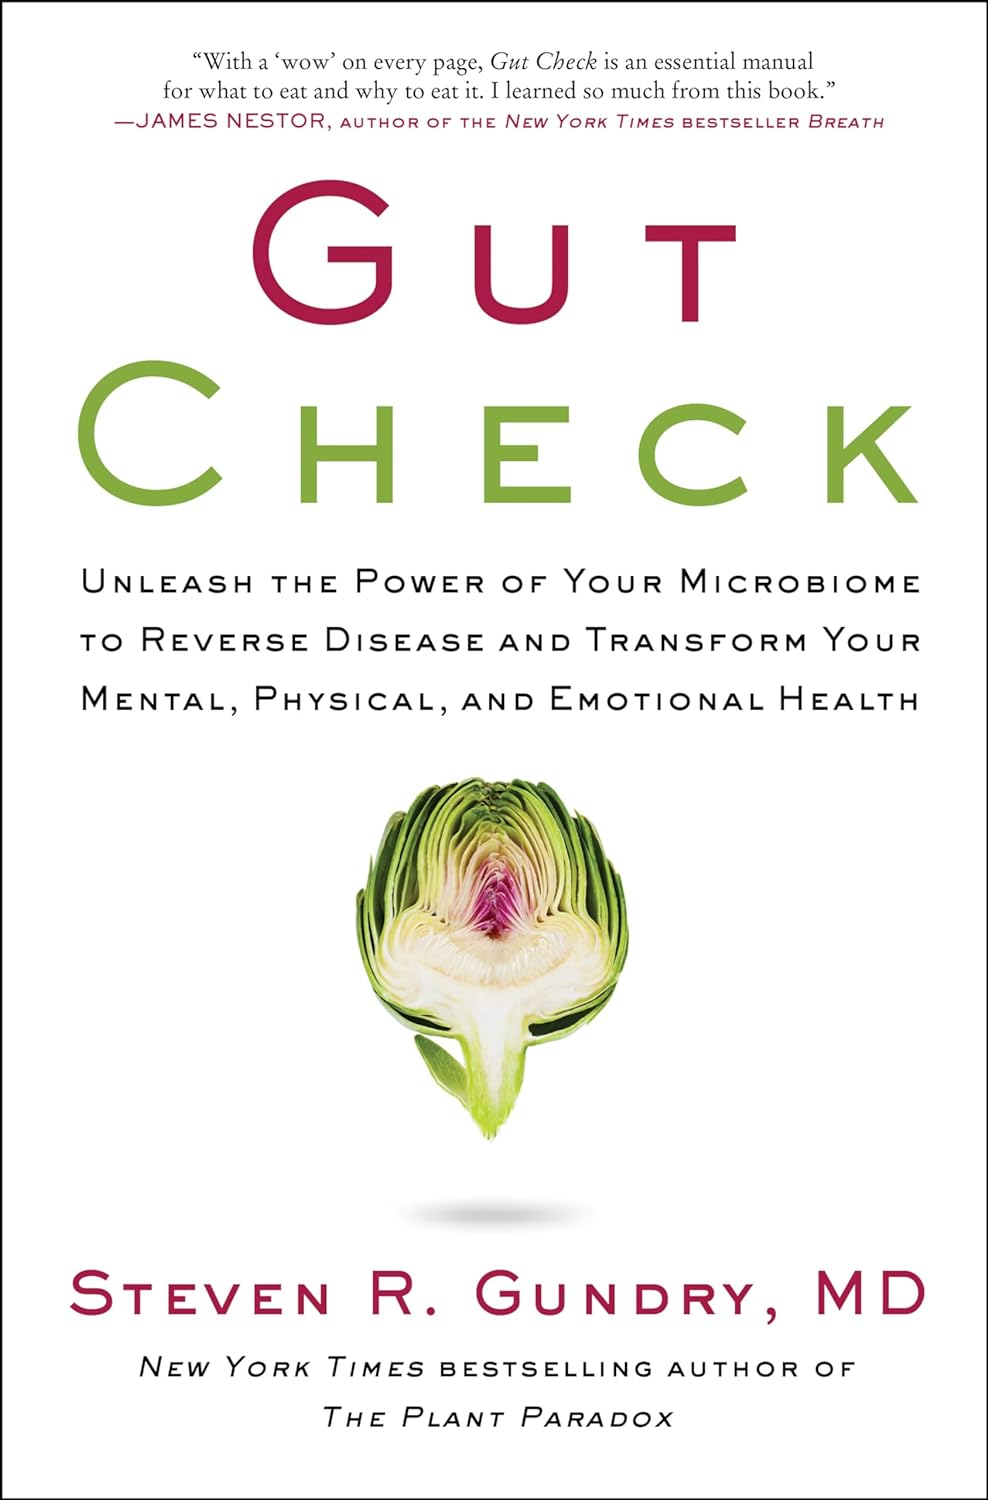 Image for "Gut Check"